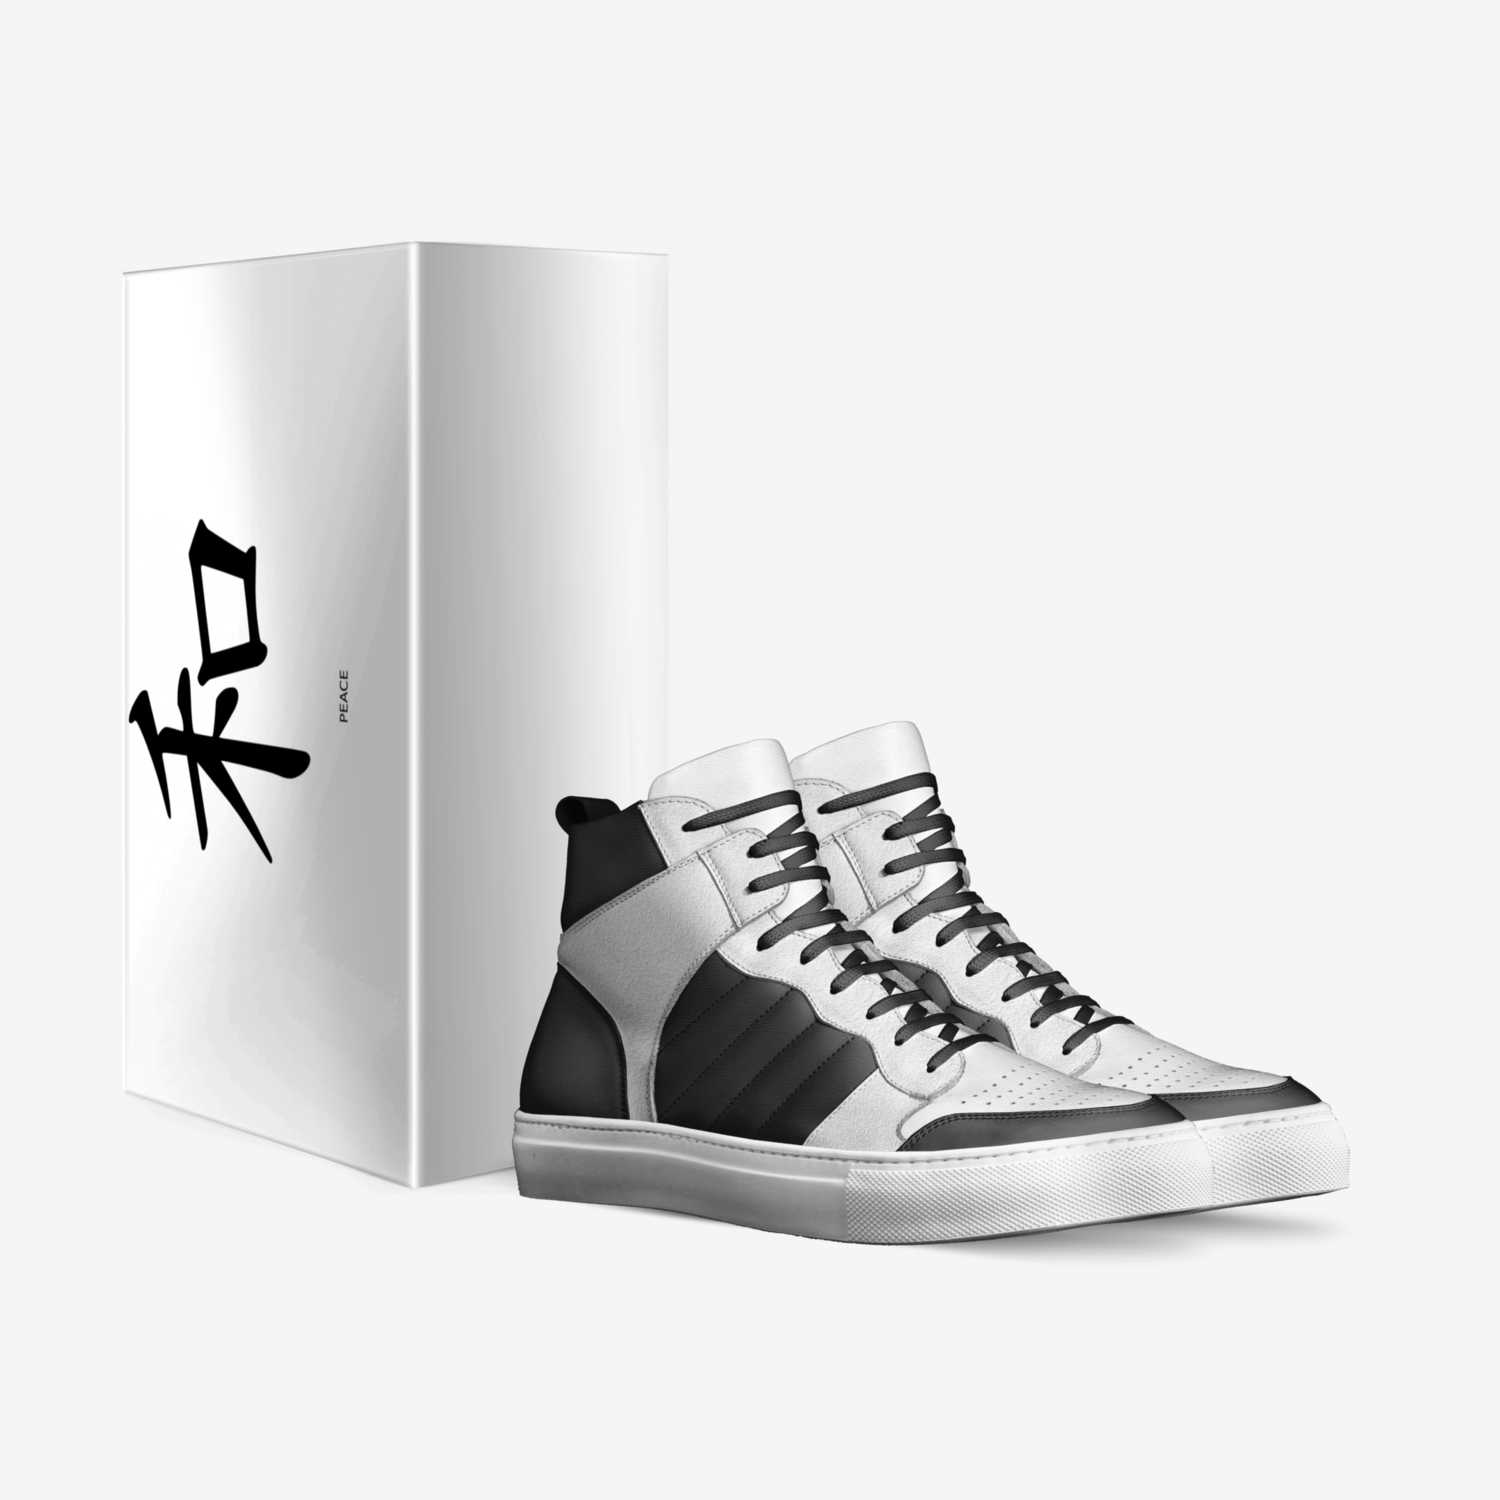 B&W R custom made in Italy shoes by Jakob Hedelin | Box view